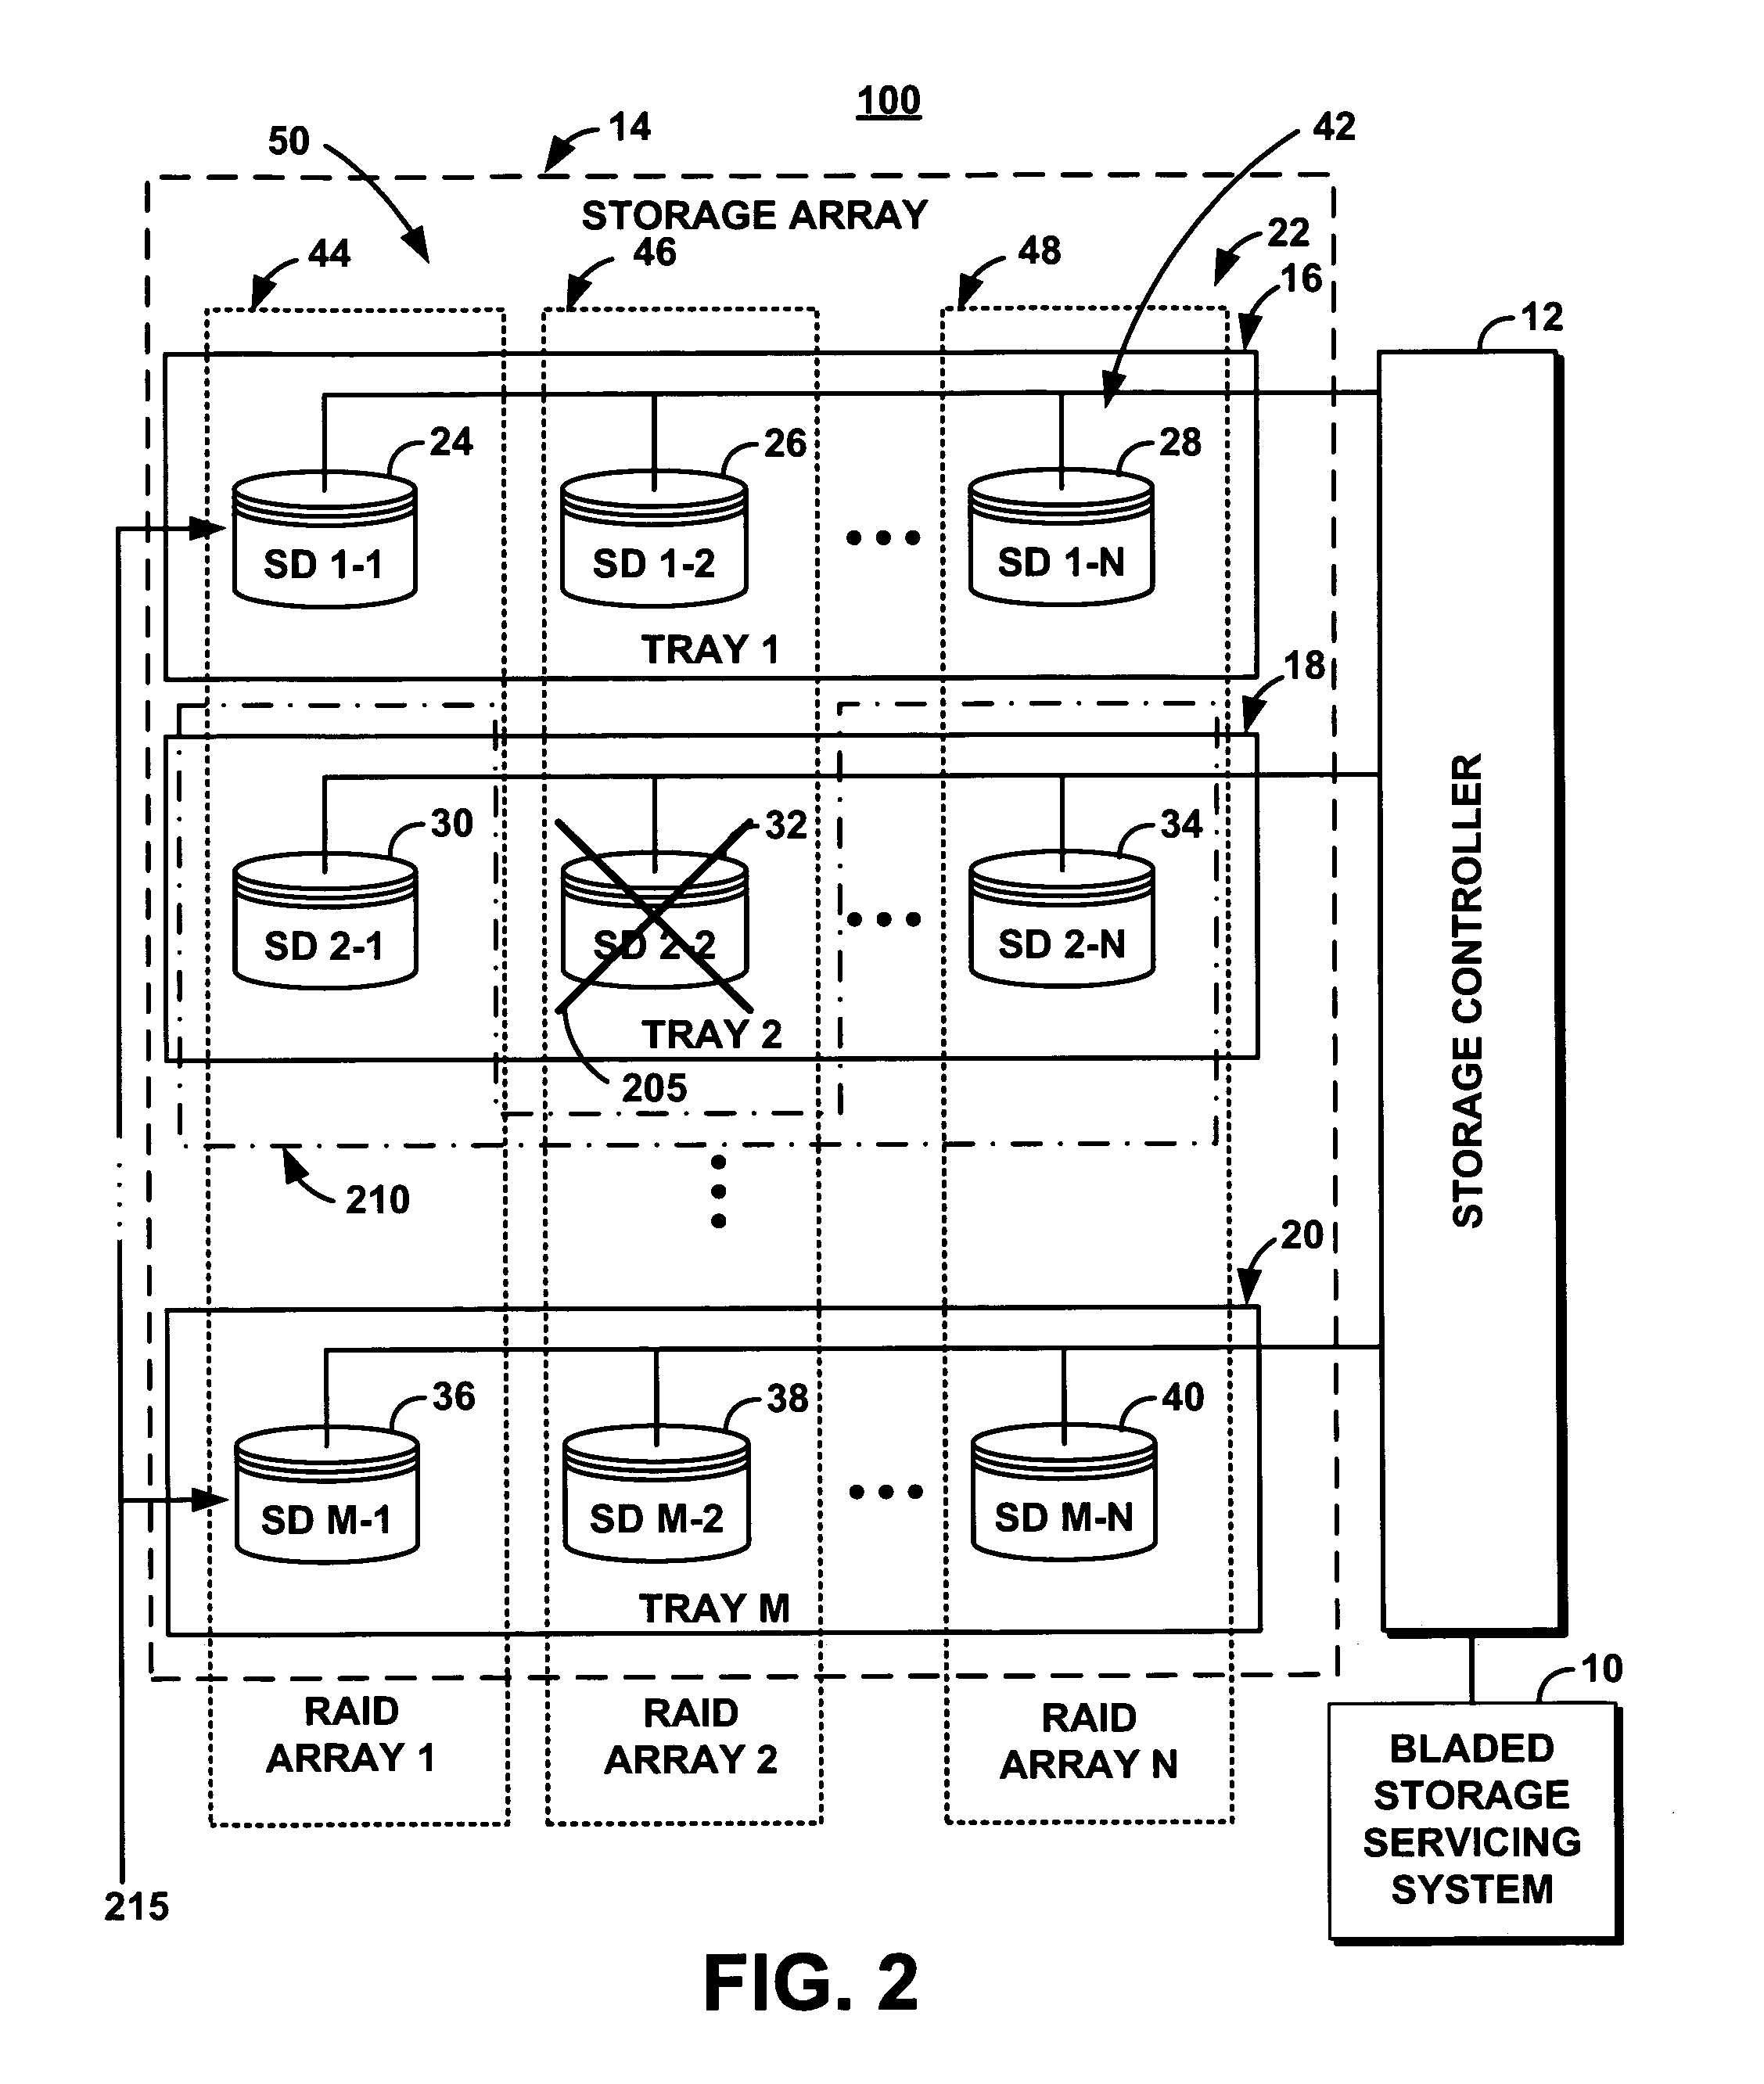 Method for servicing storage devices in a bladed storage subsystem